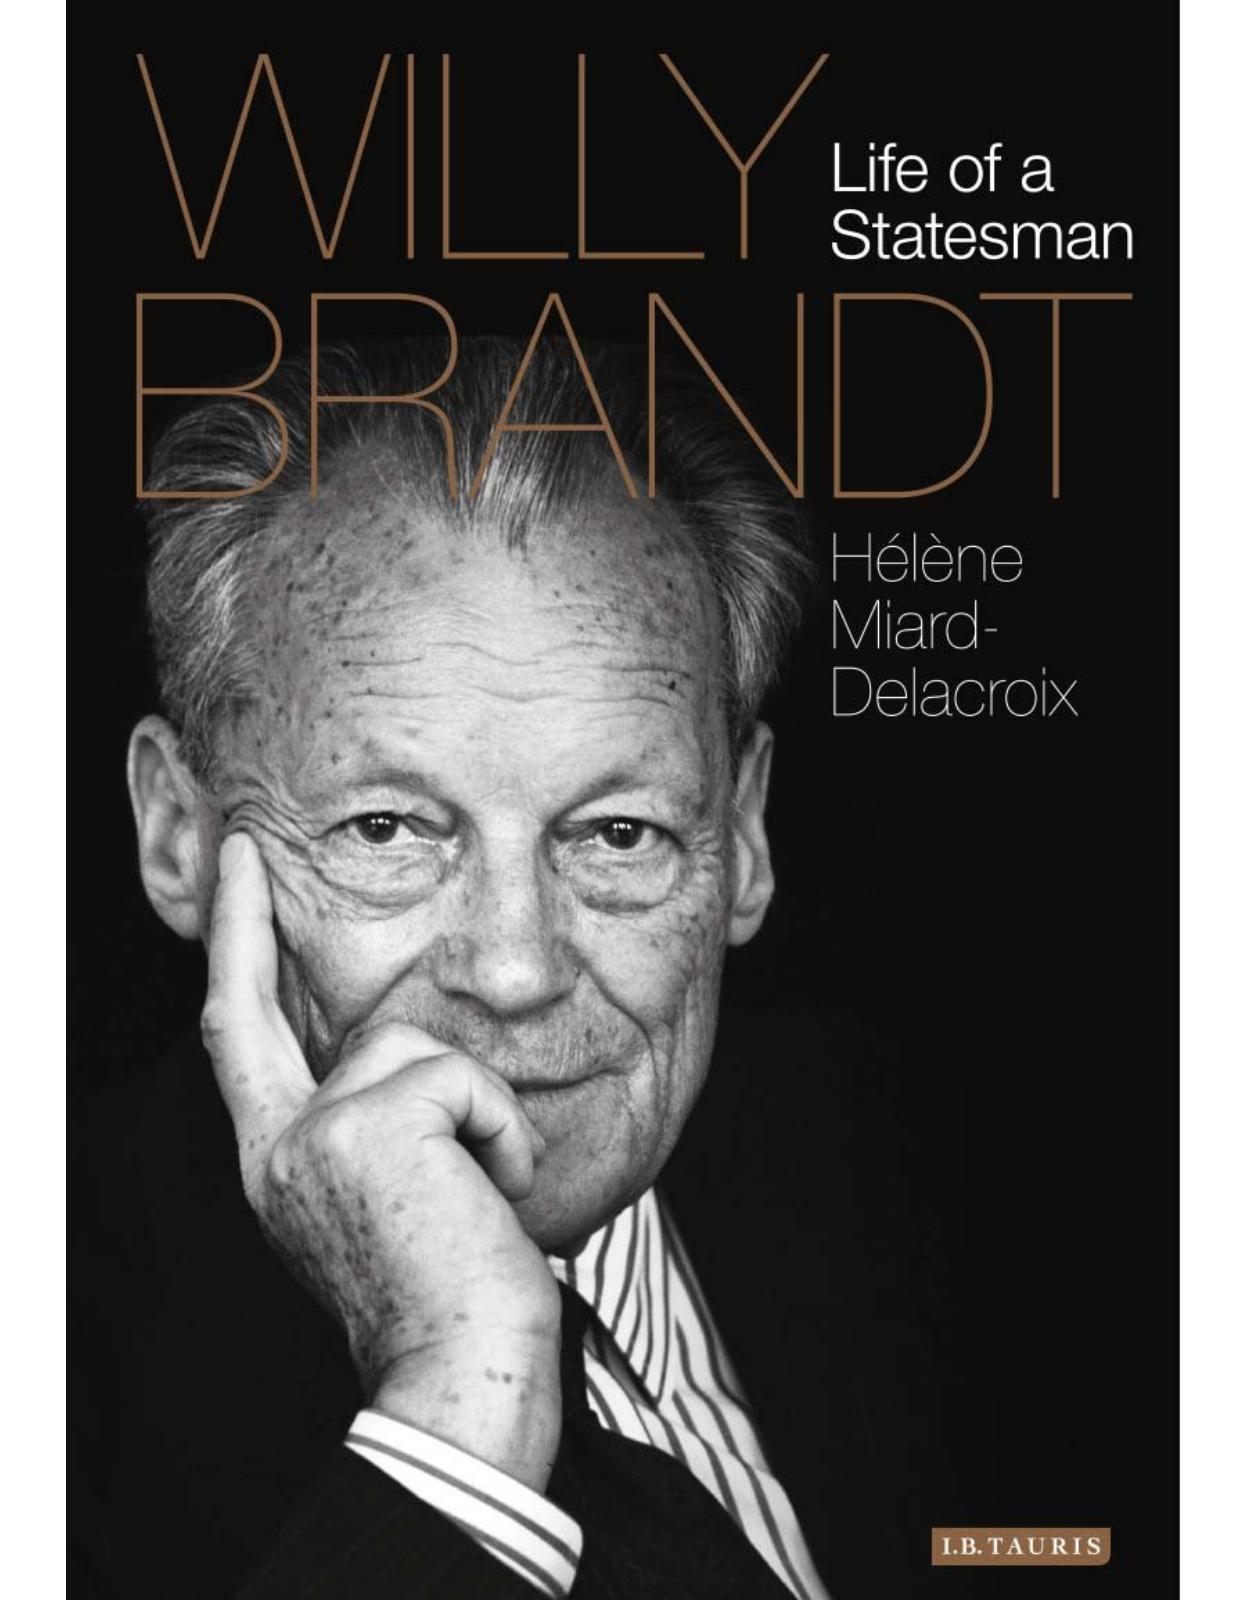 Willy Brandt: Life of a Statesman